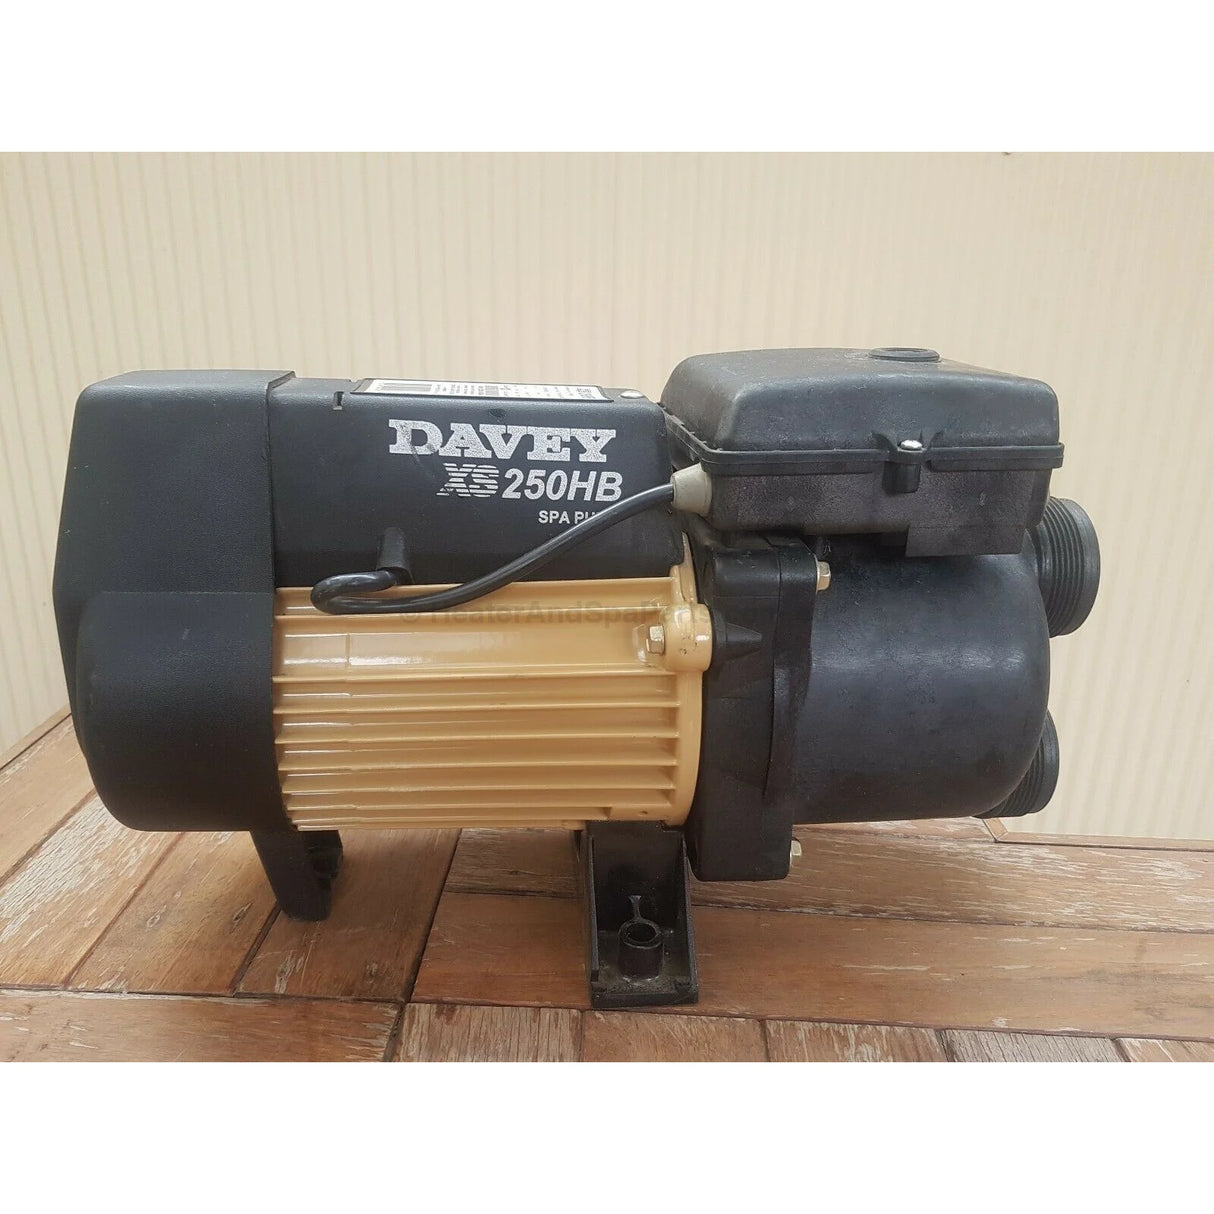 Davey Spa Bath Pumps - XS Series - XS200 / 250 / 300 / HB HD HG - Replacement Listing - Heater and Spa Parts